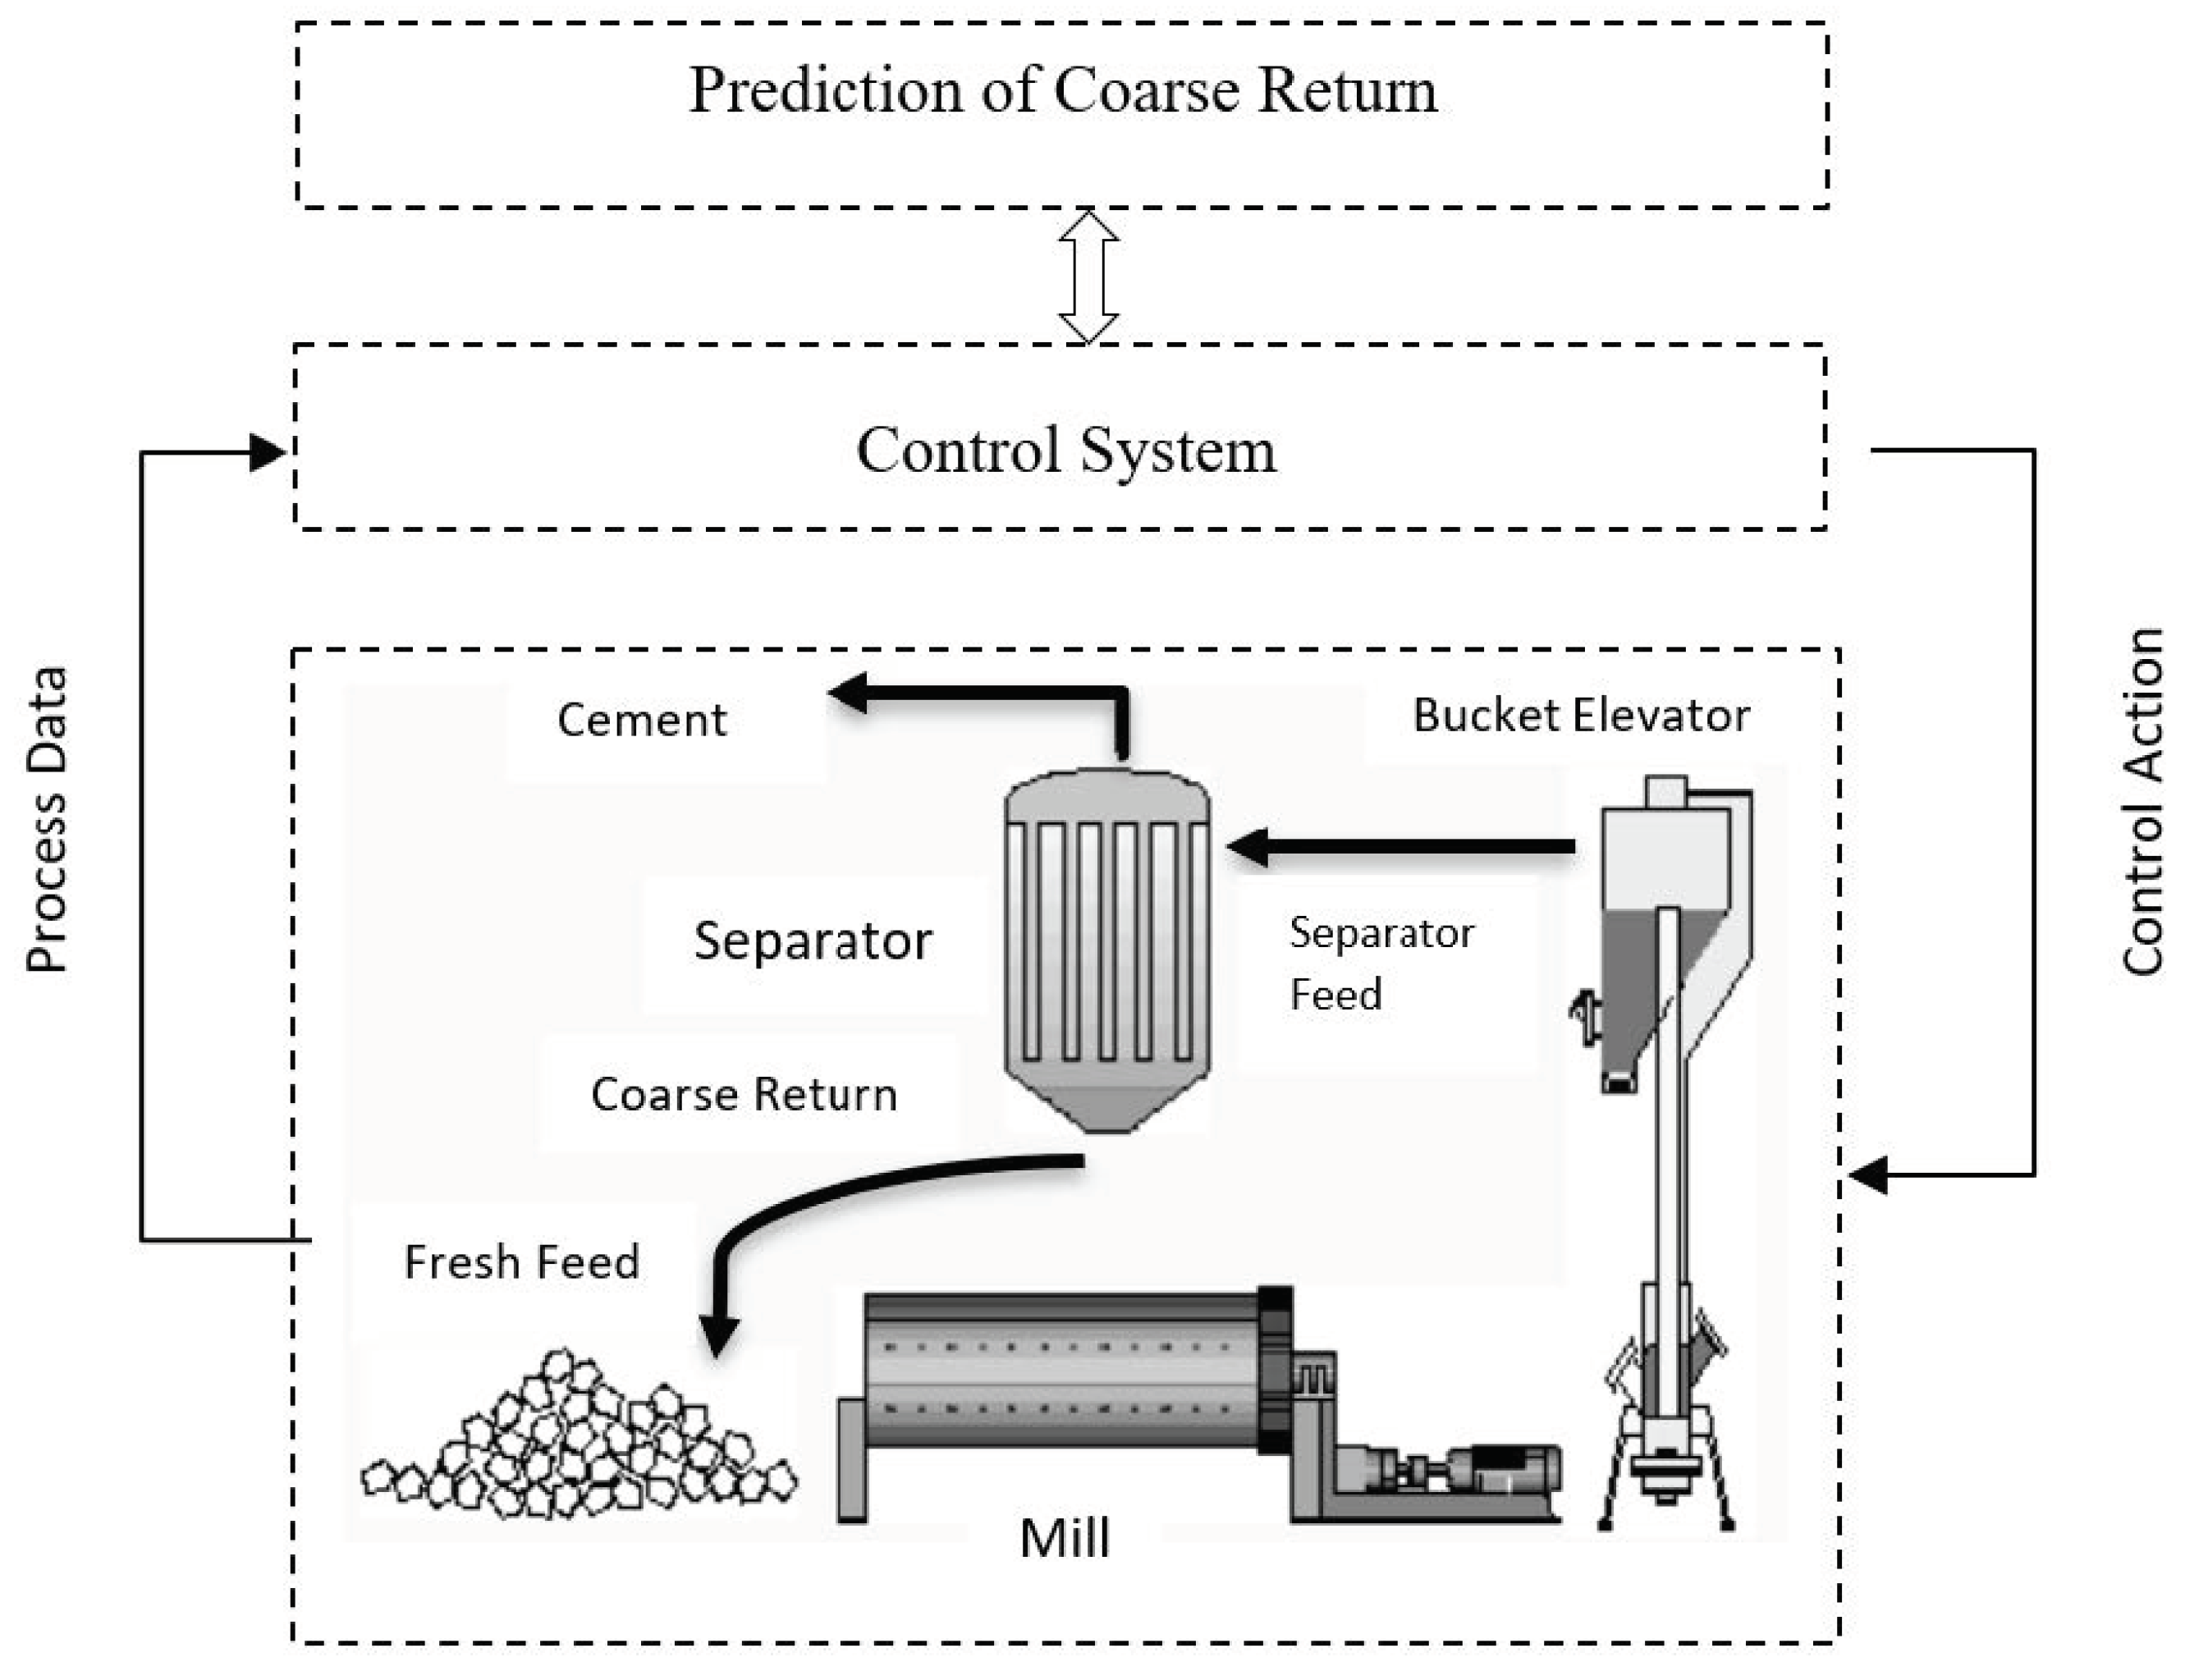 Applied Sciences | Free Full-Text | Coarse Return Prediction in a Cement  Industry's Closed Grinding Circuit System through a Fully Connected Deep  Neural Network (FCDNN) Model